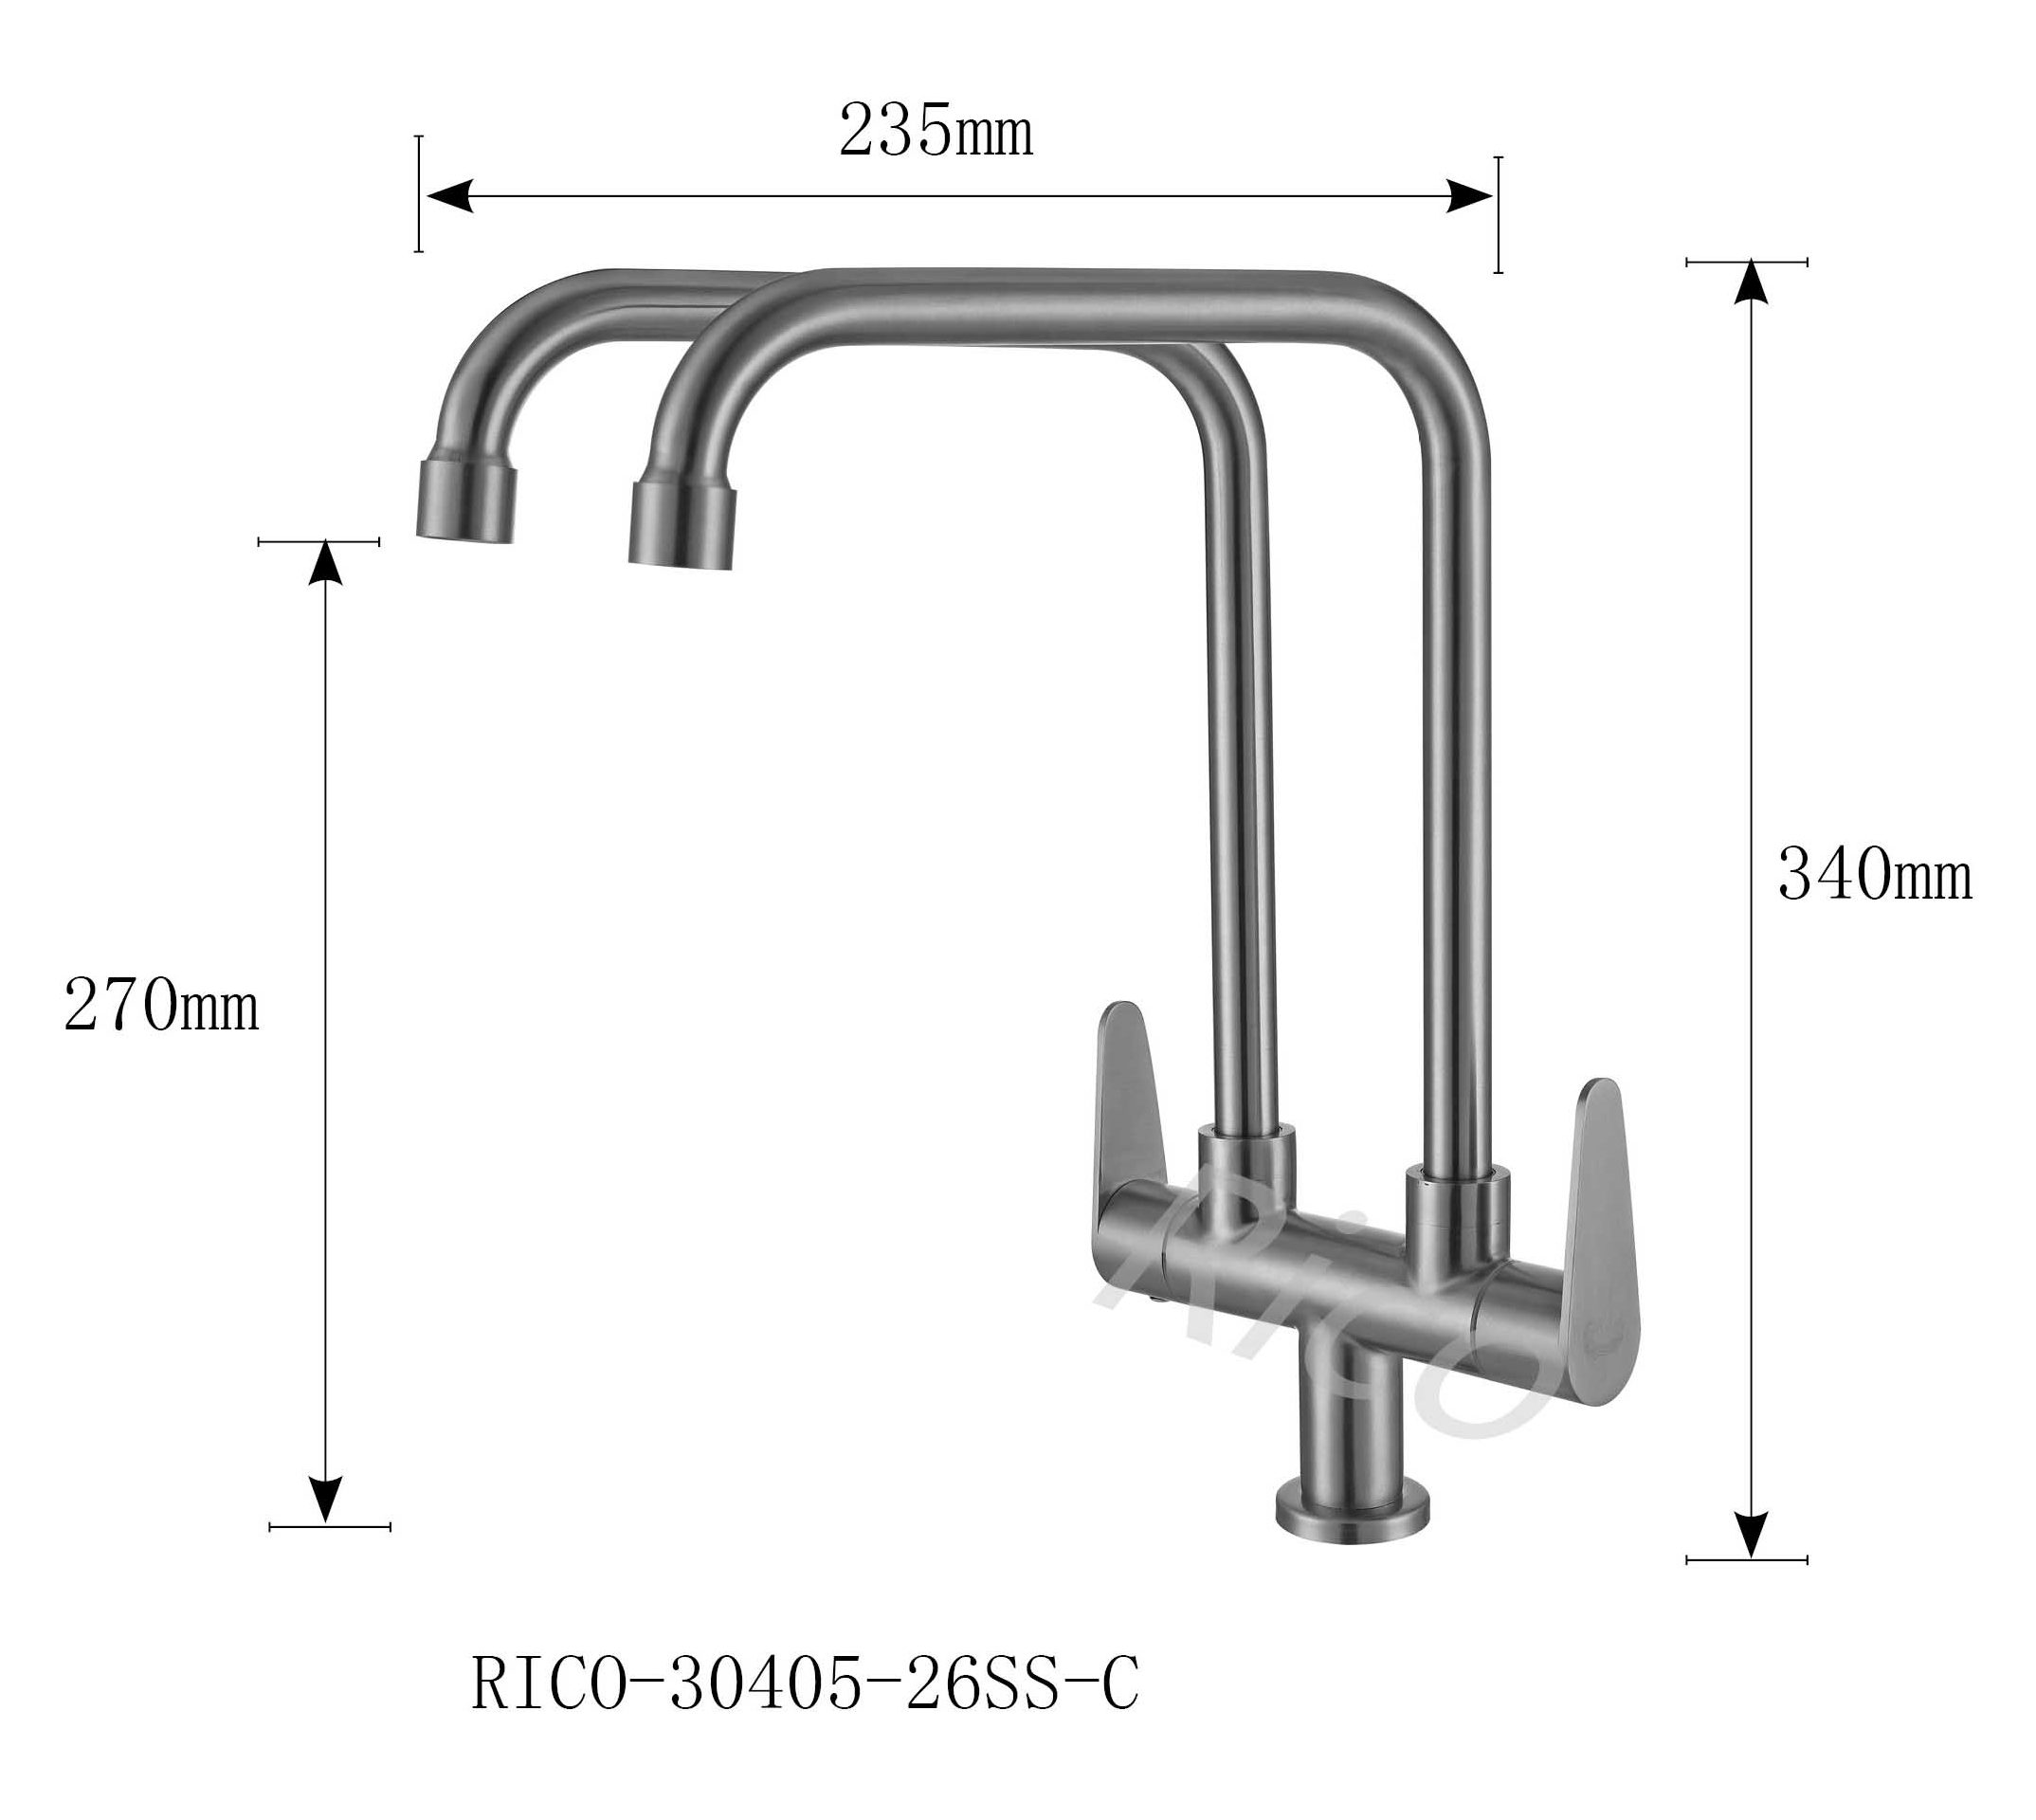 Rico : Stainless Steel Sink Cold Tap- RICO-30405-26SS-C